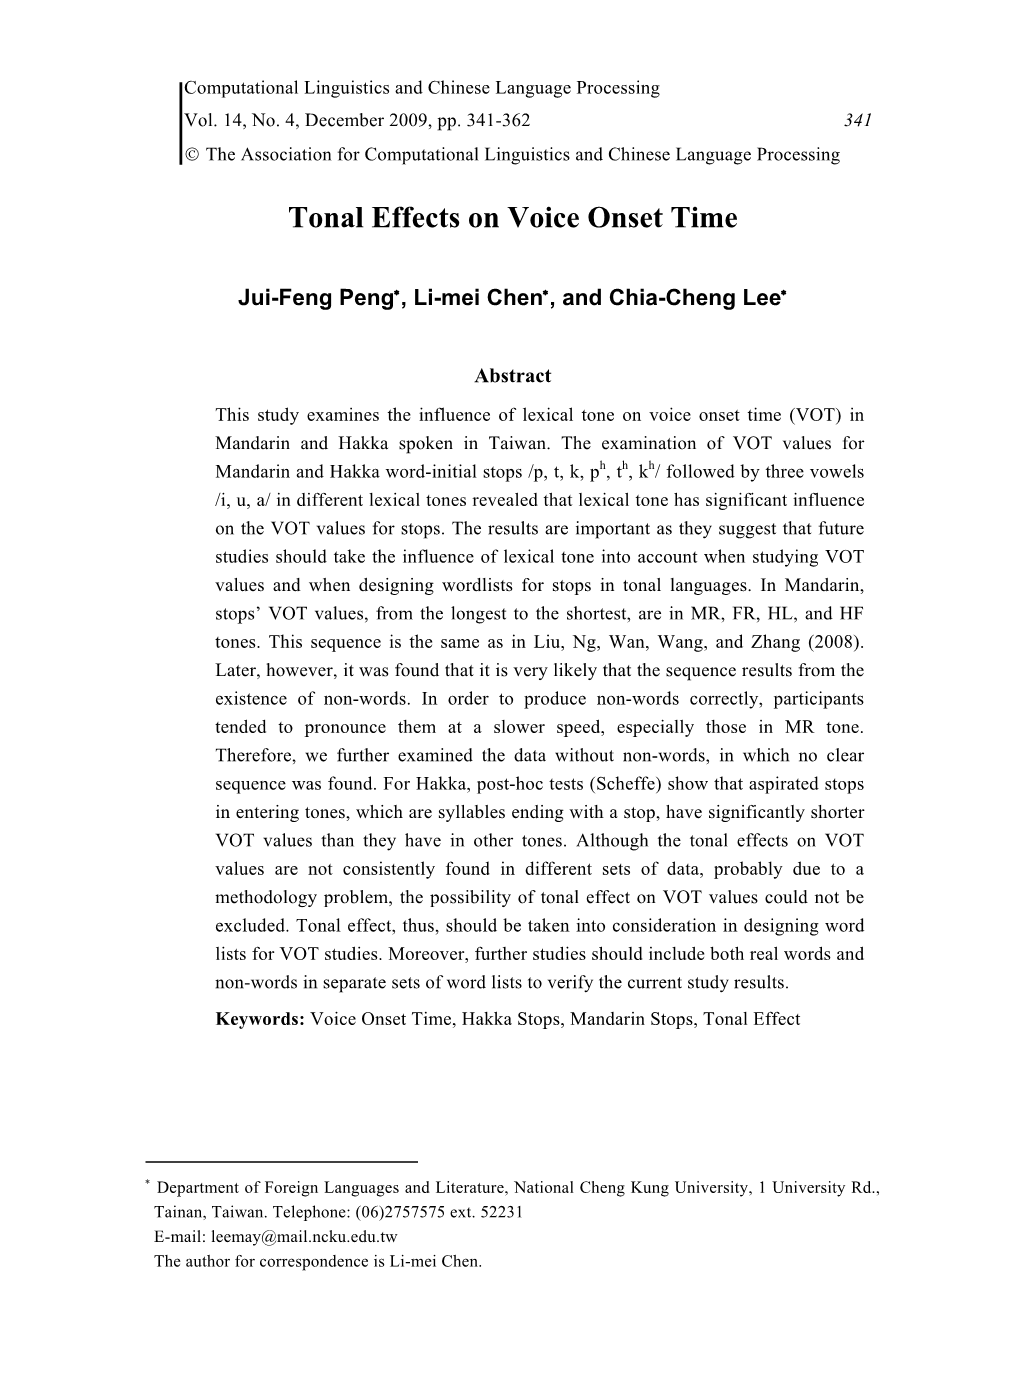 Tonal Effects on Voice Onset Time